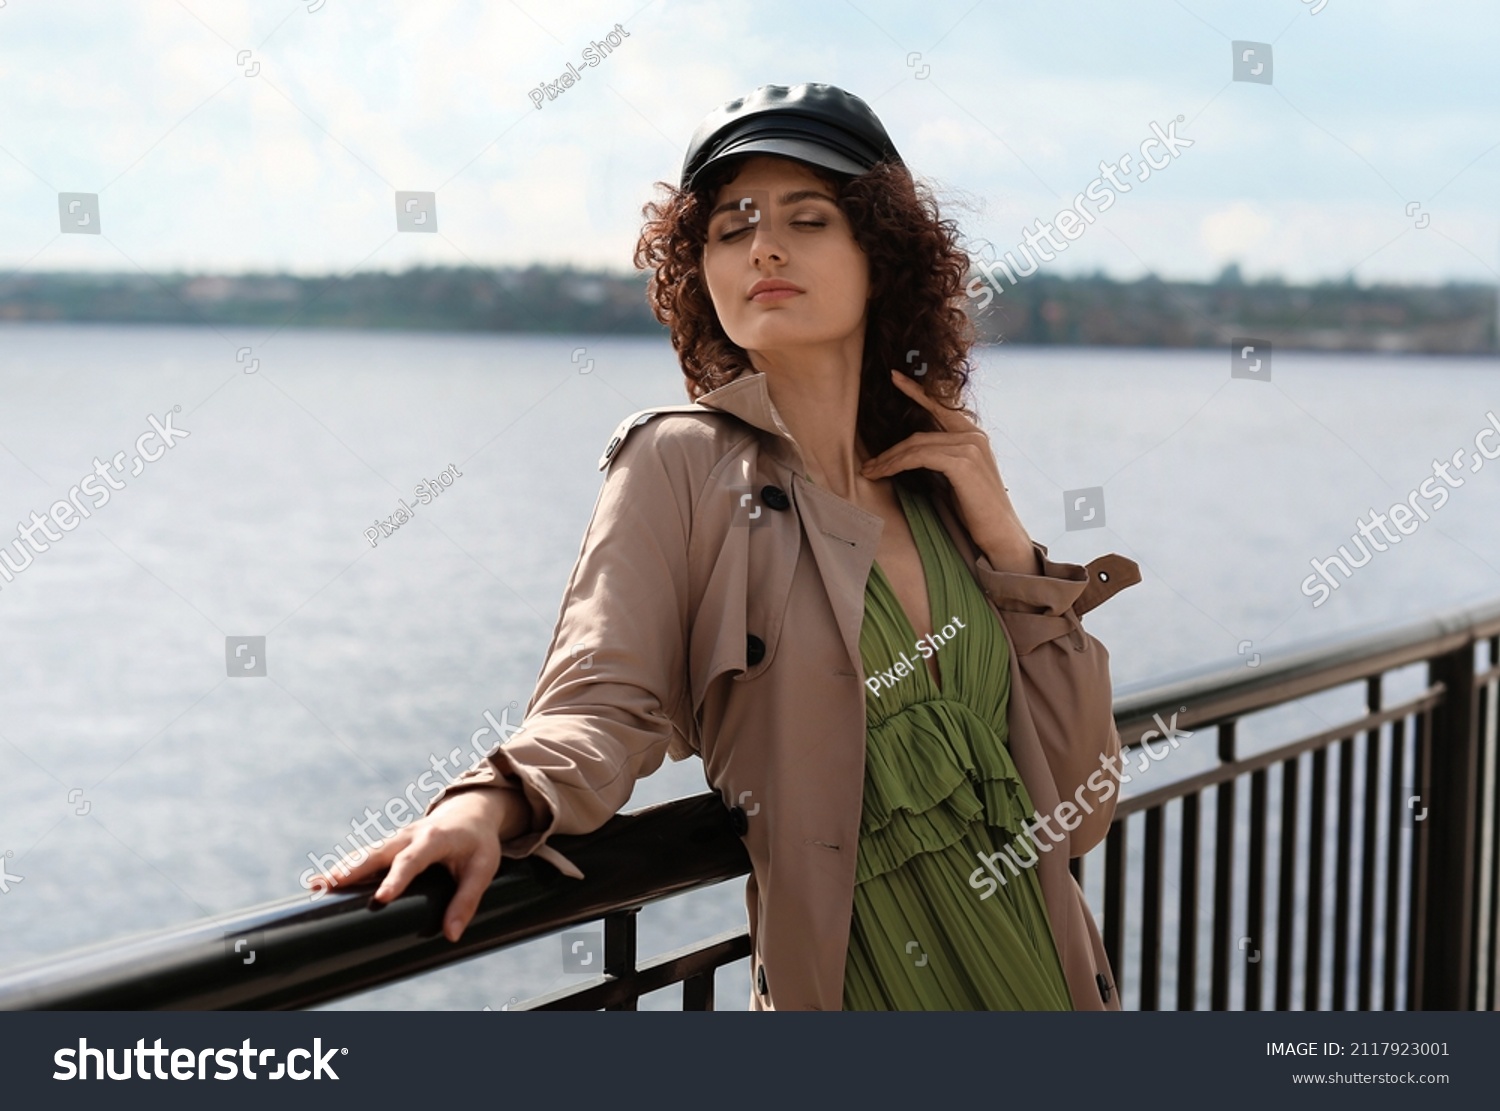 Young woman in leather cap enjoining sunny day outdoors #2117923001